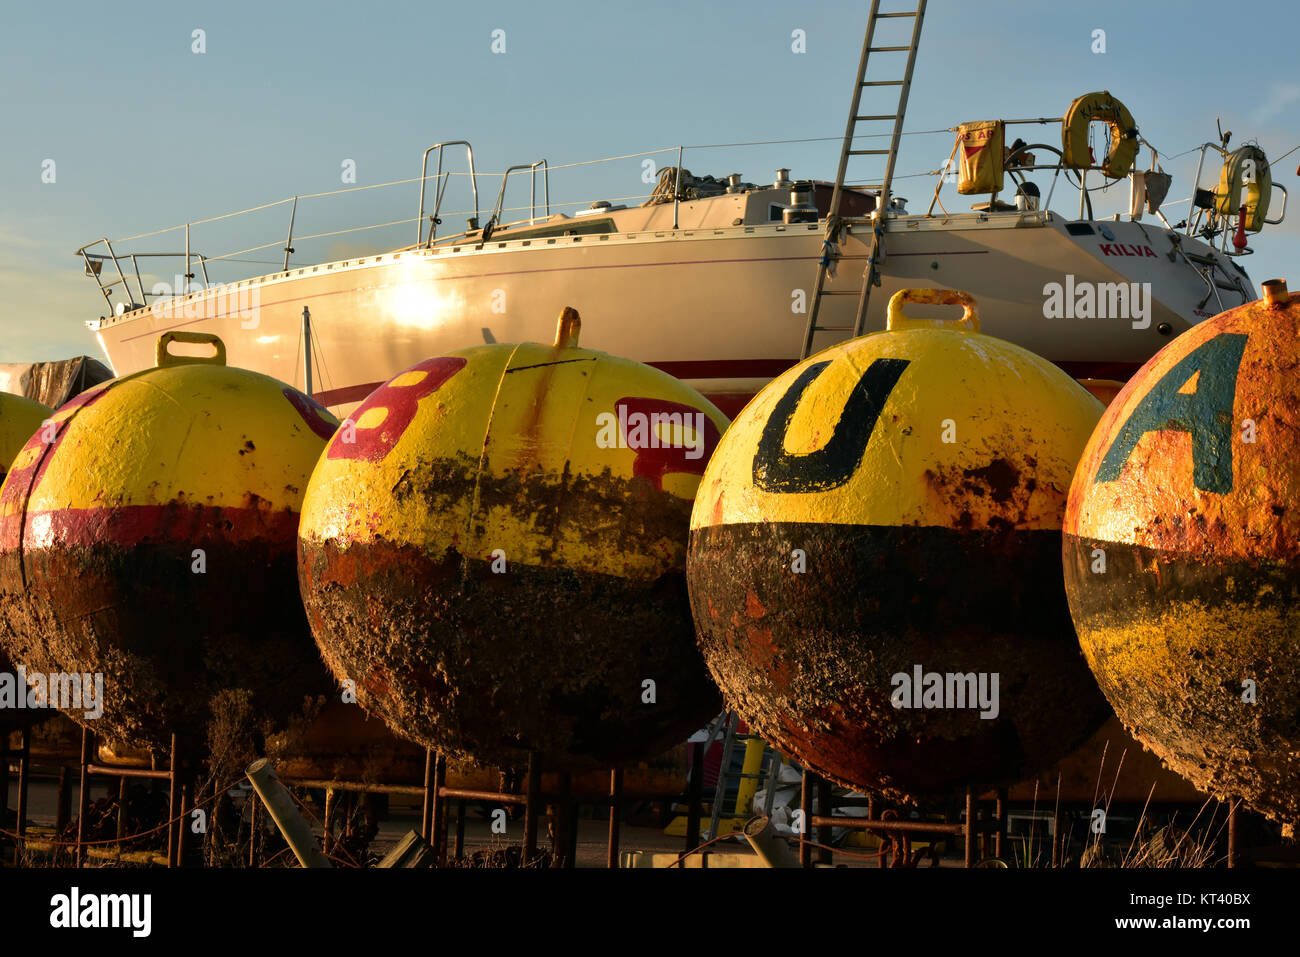 Rusty Yellow Buoys And A Sailing Yacht In A Traditional Boatyard On The